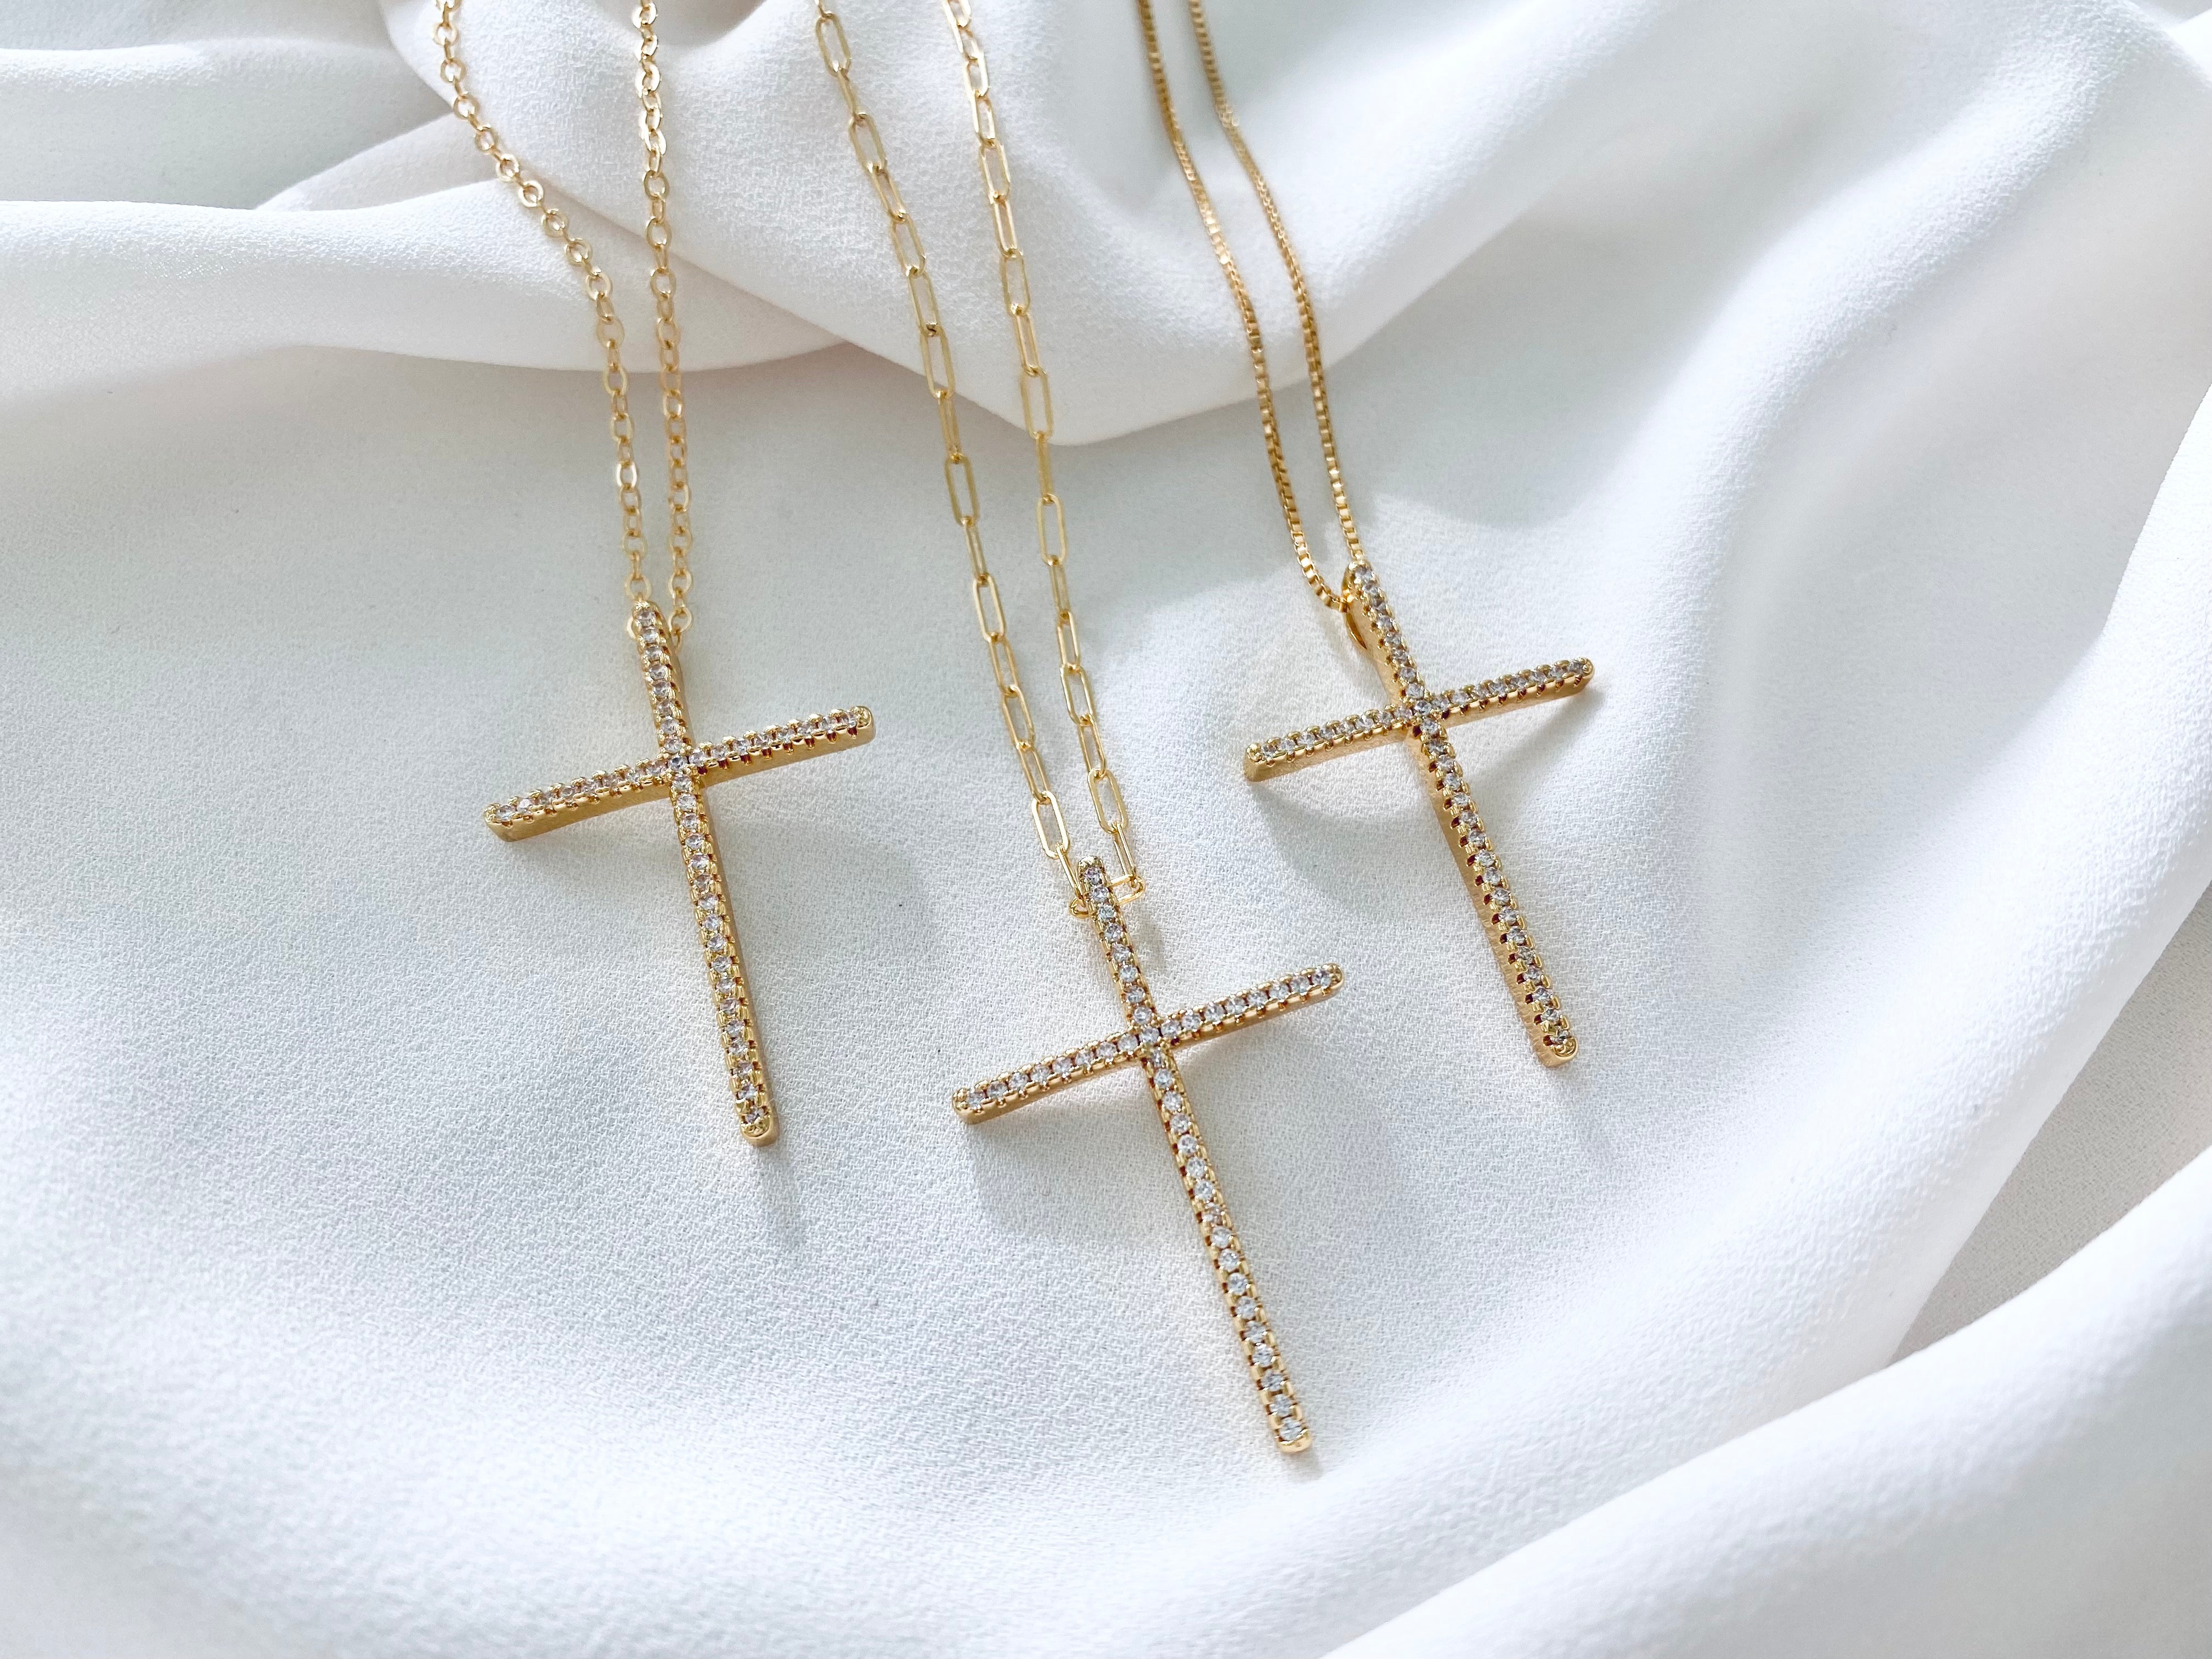 Large Pave Cross Pendant Necklace - Gold Filled Chain - CZ stones